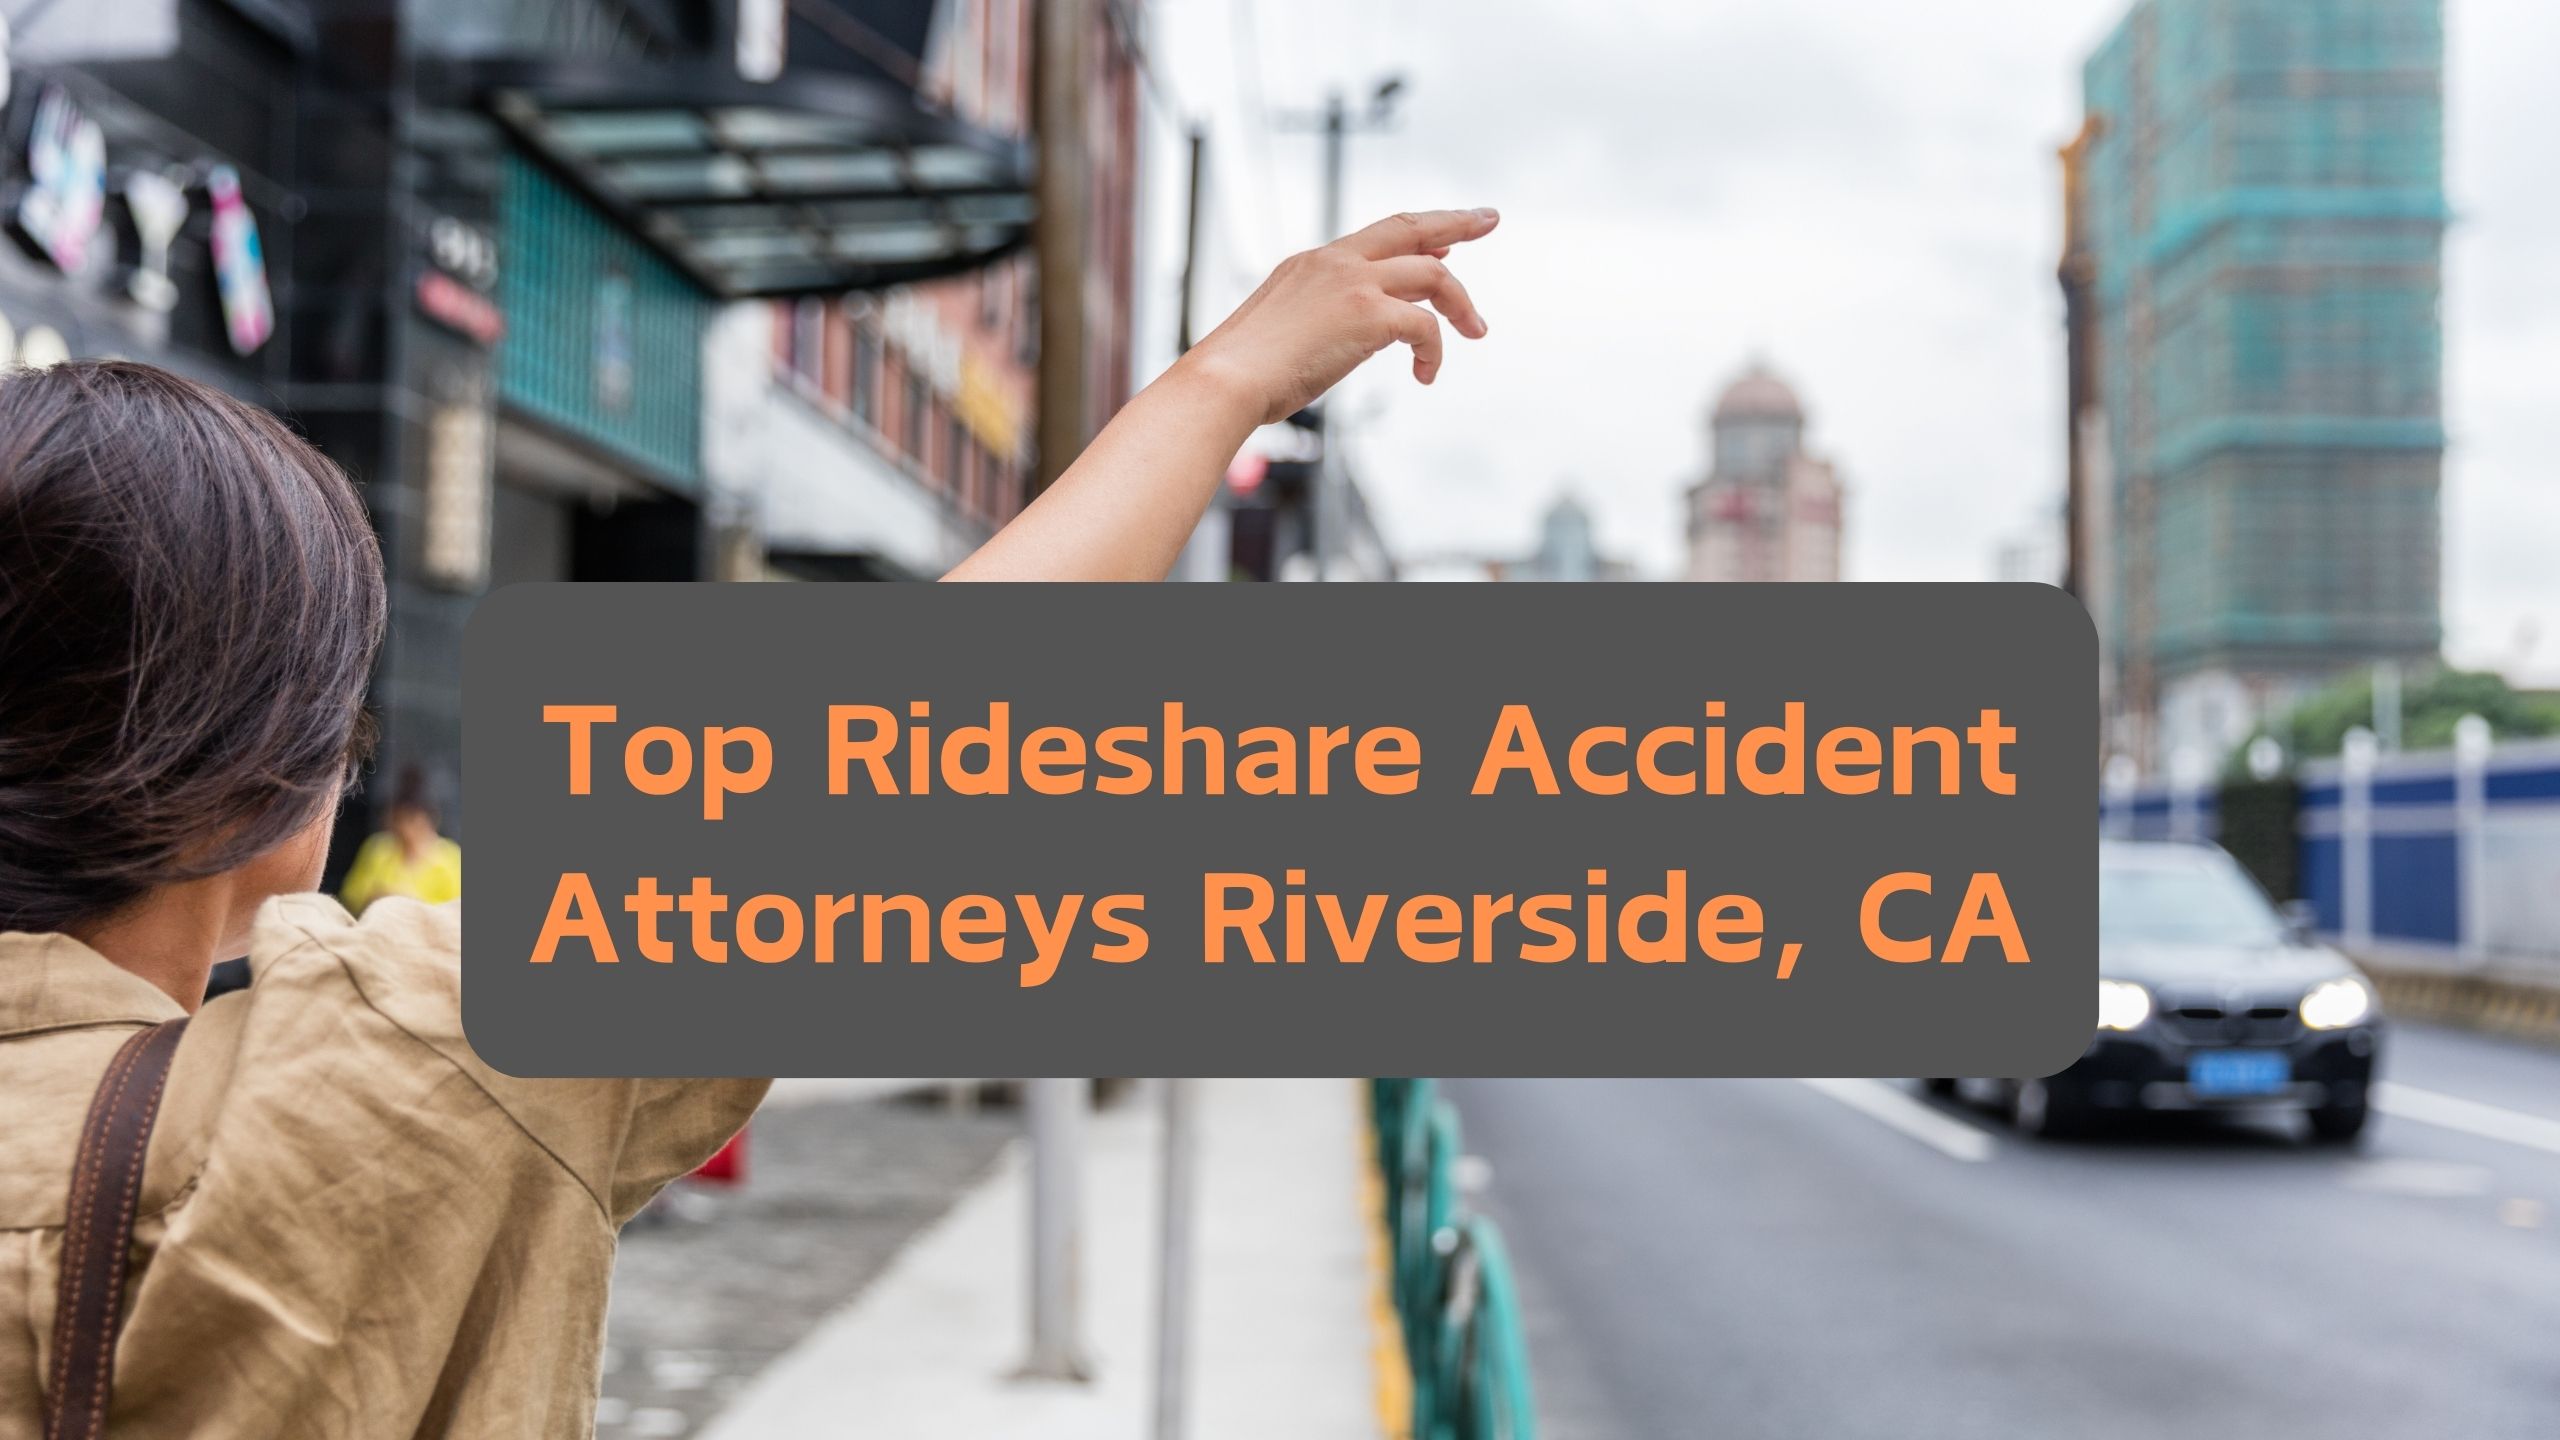 Top Rideshare Accident Attorney Riverside